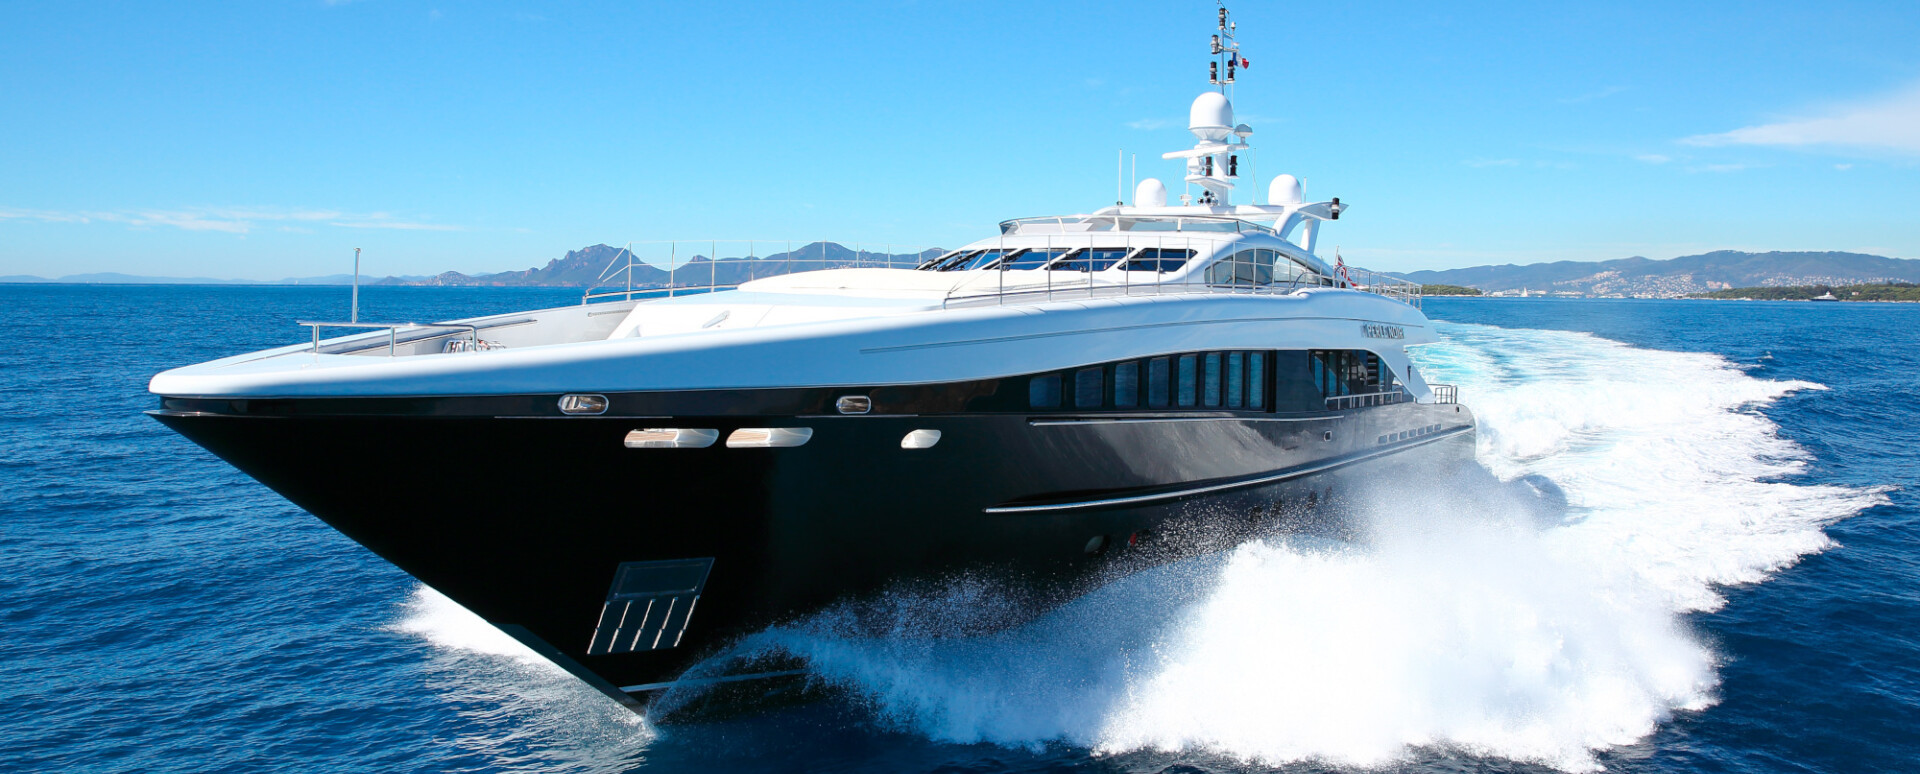                                                                                                     Heesen 3700 - Perle Noire - Back on the Market with a further EUR 200k Price Drop!
                                                                                            